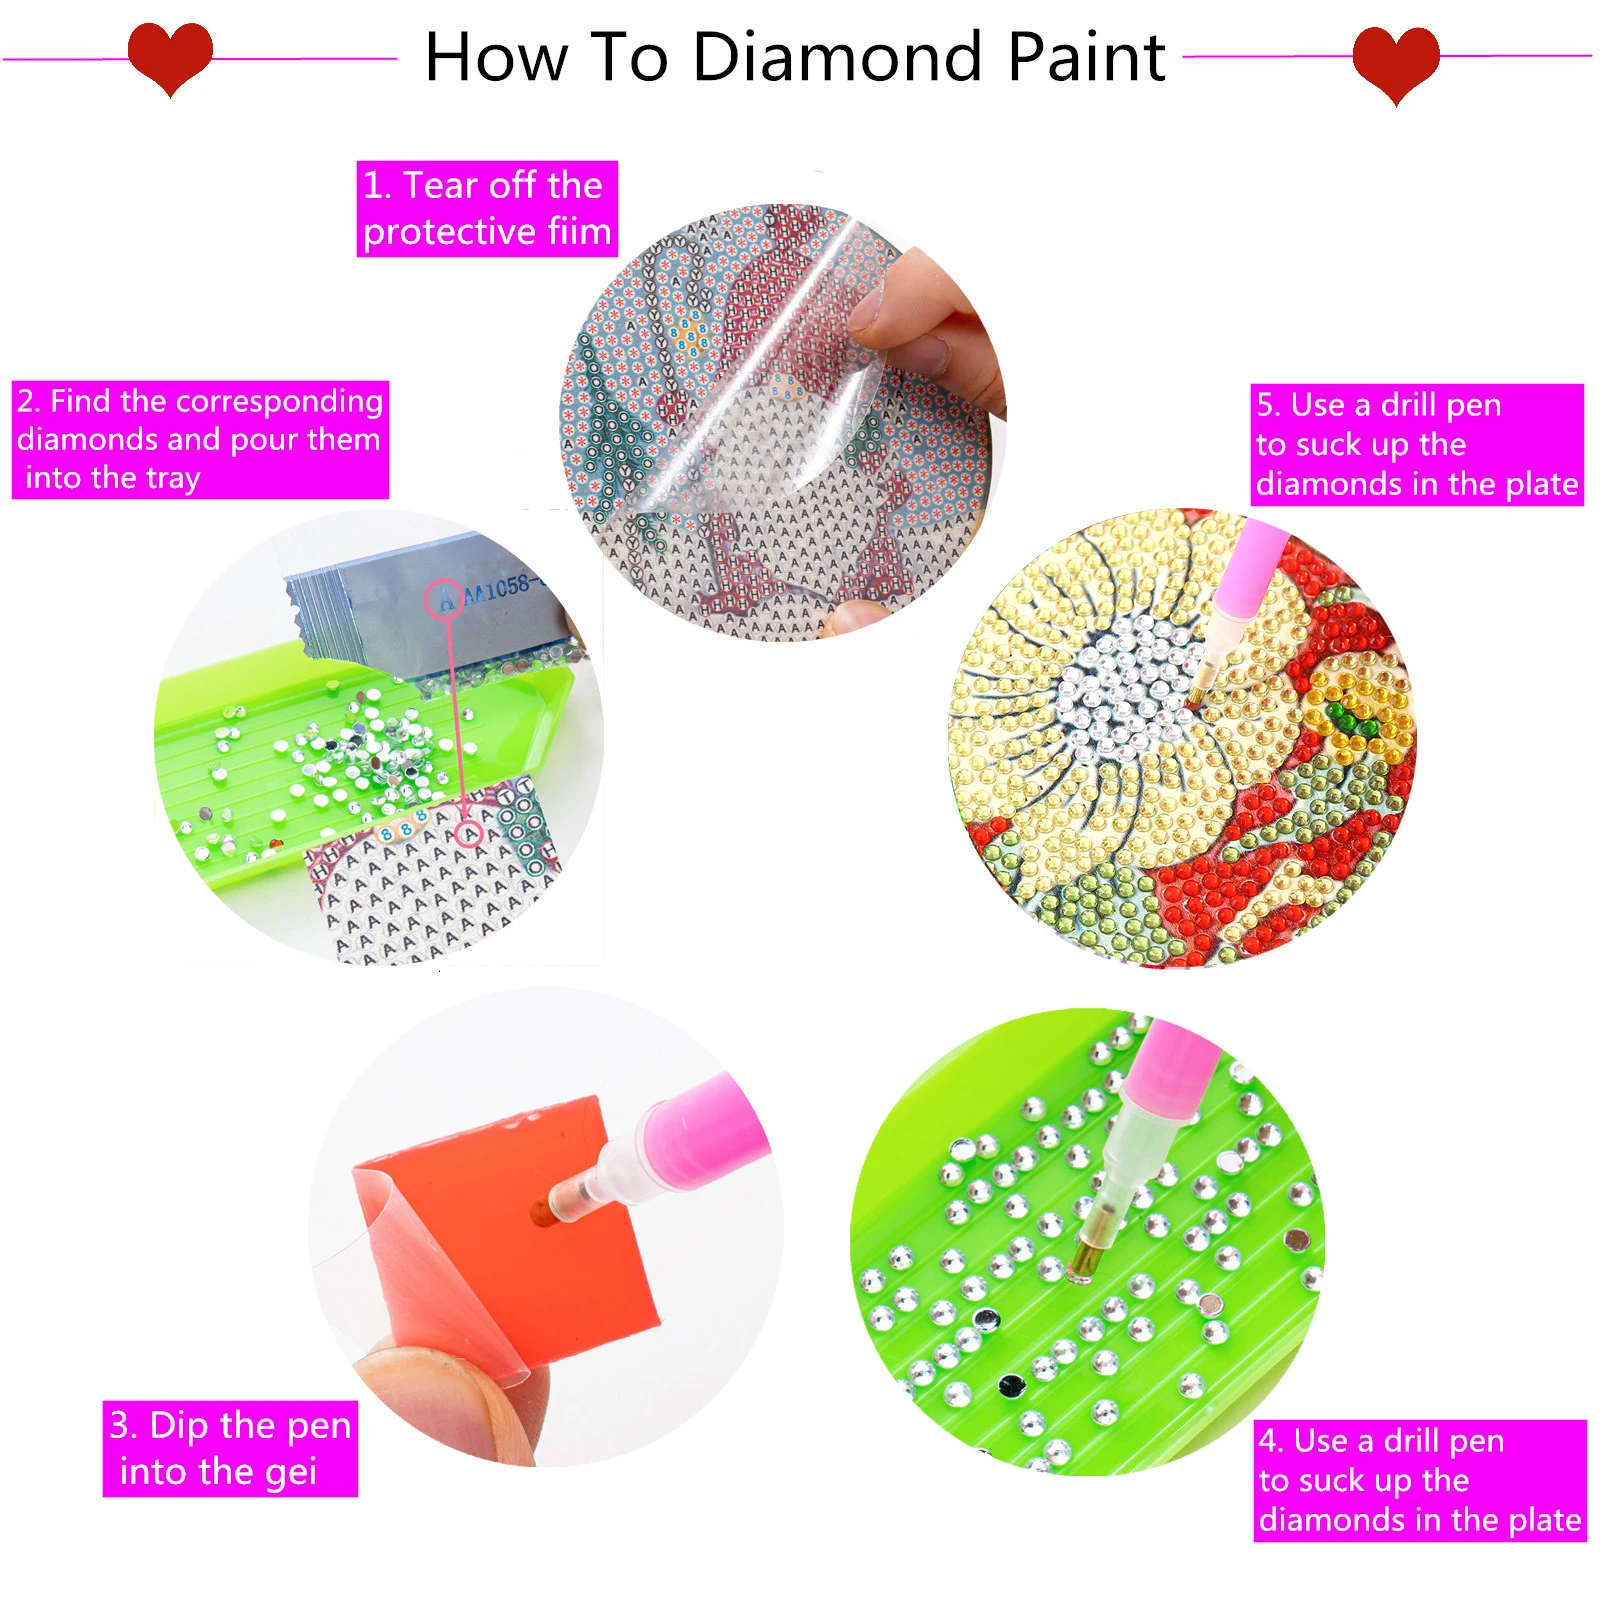 8 Pcs Diamond Painting Coasters with Holder, DIY Cup Coasters Diamond Art  Kits - Diamond Painting Kits for Adults Kids - Wooden Coasters for Car Home  Office (Landscape) 